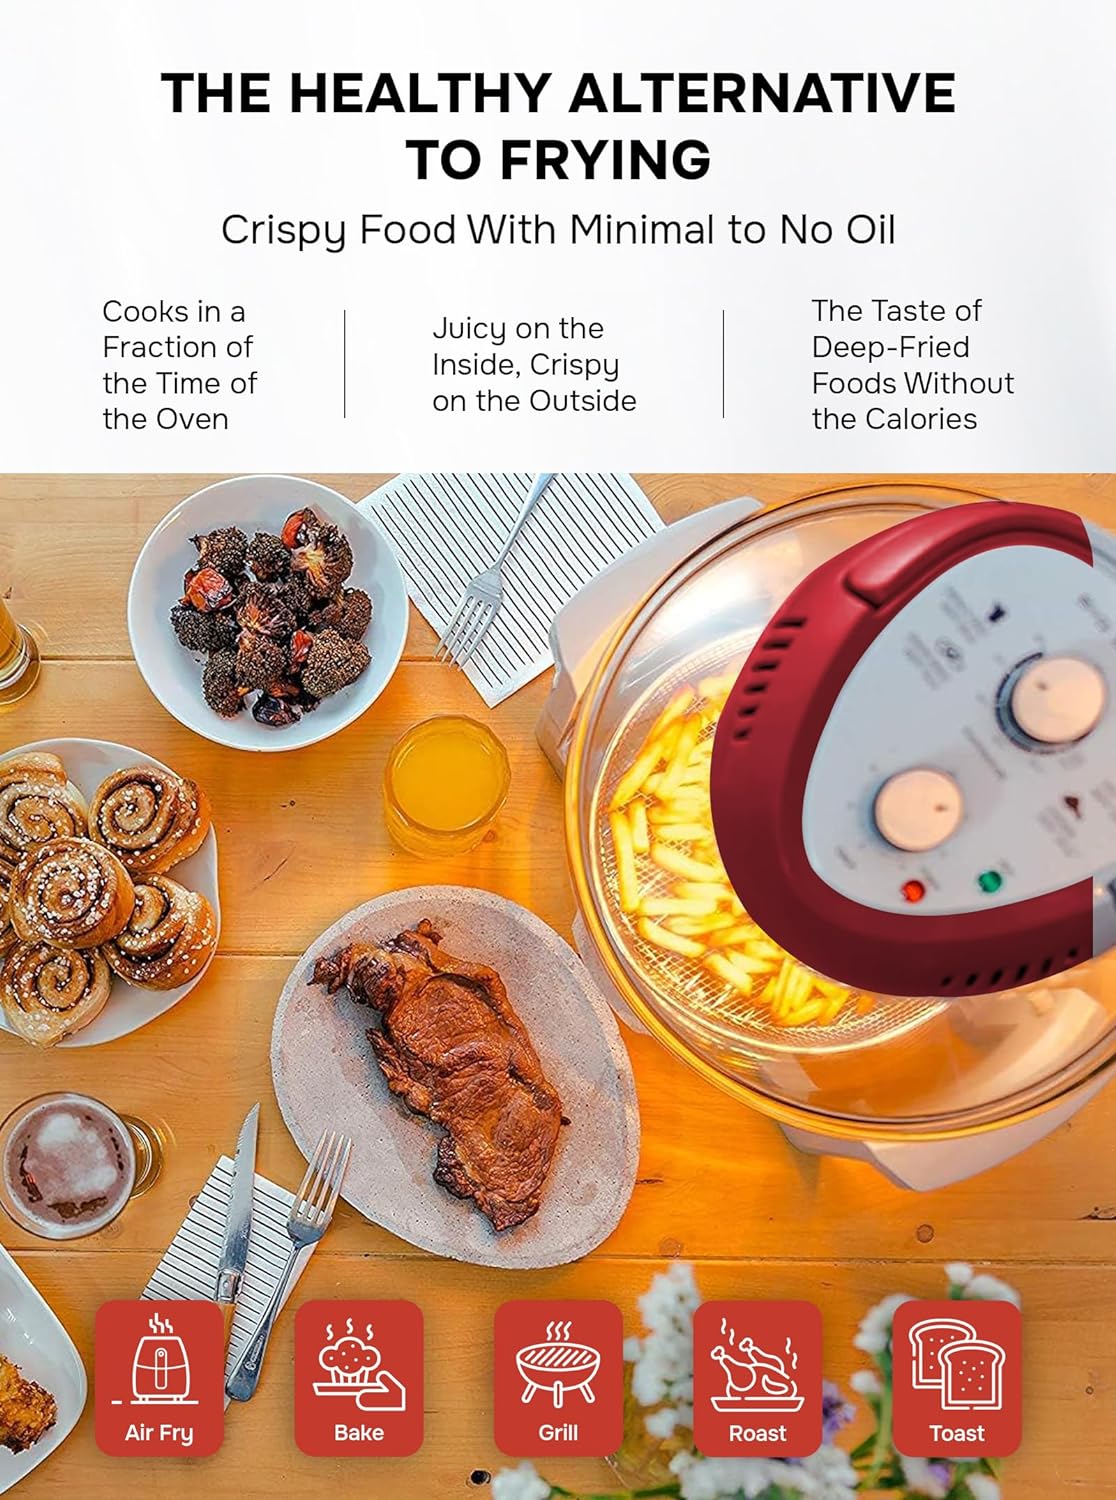 Ninja's Top-Selling Air Fryer Is Now Just $90 on  - Parade